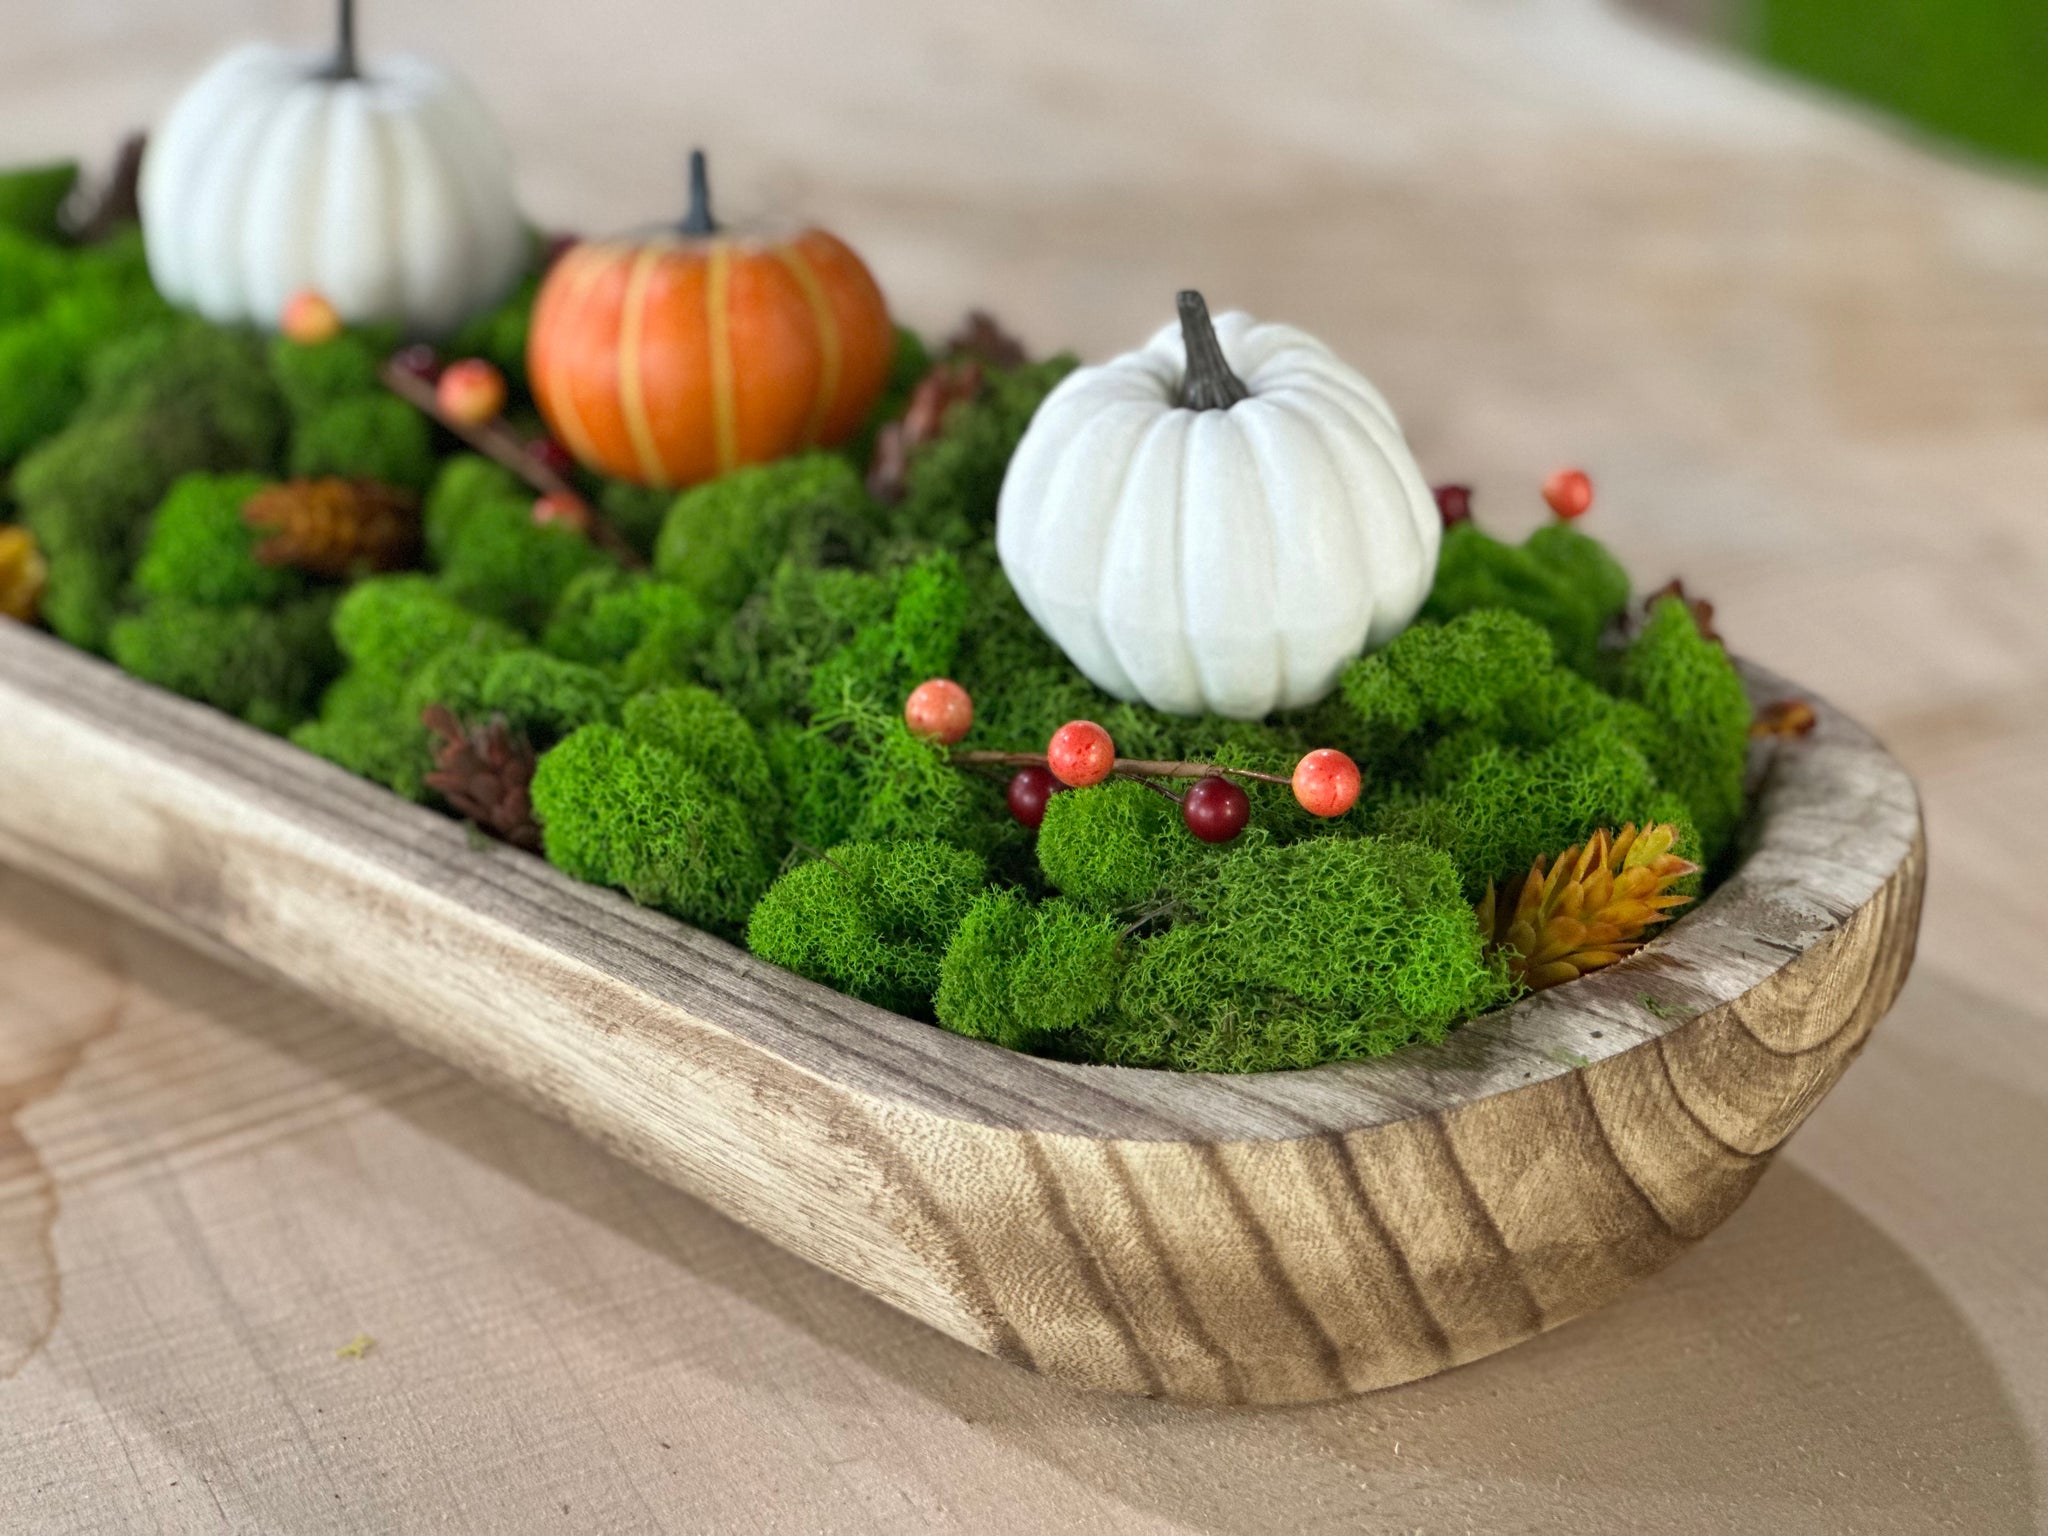 Carved Wooden Bowl Centerpiece with Lush Moss For Sale